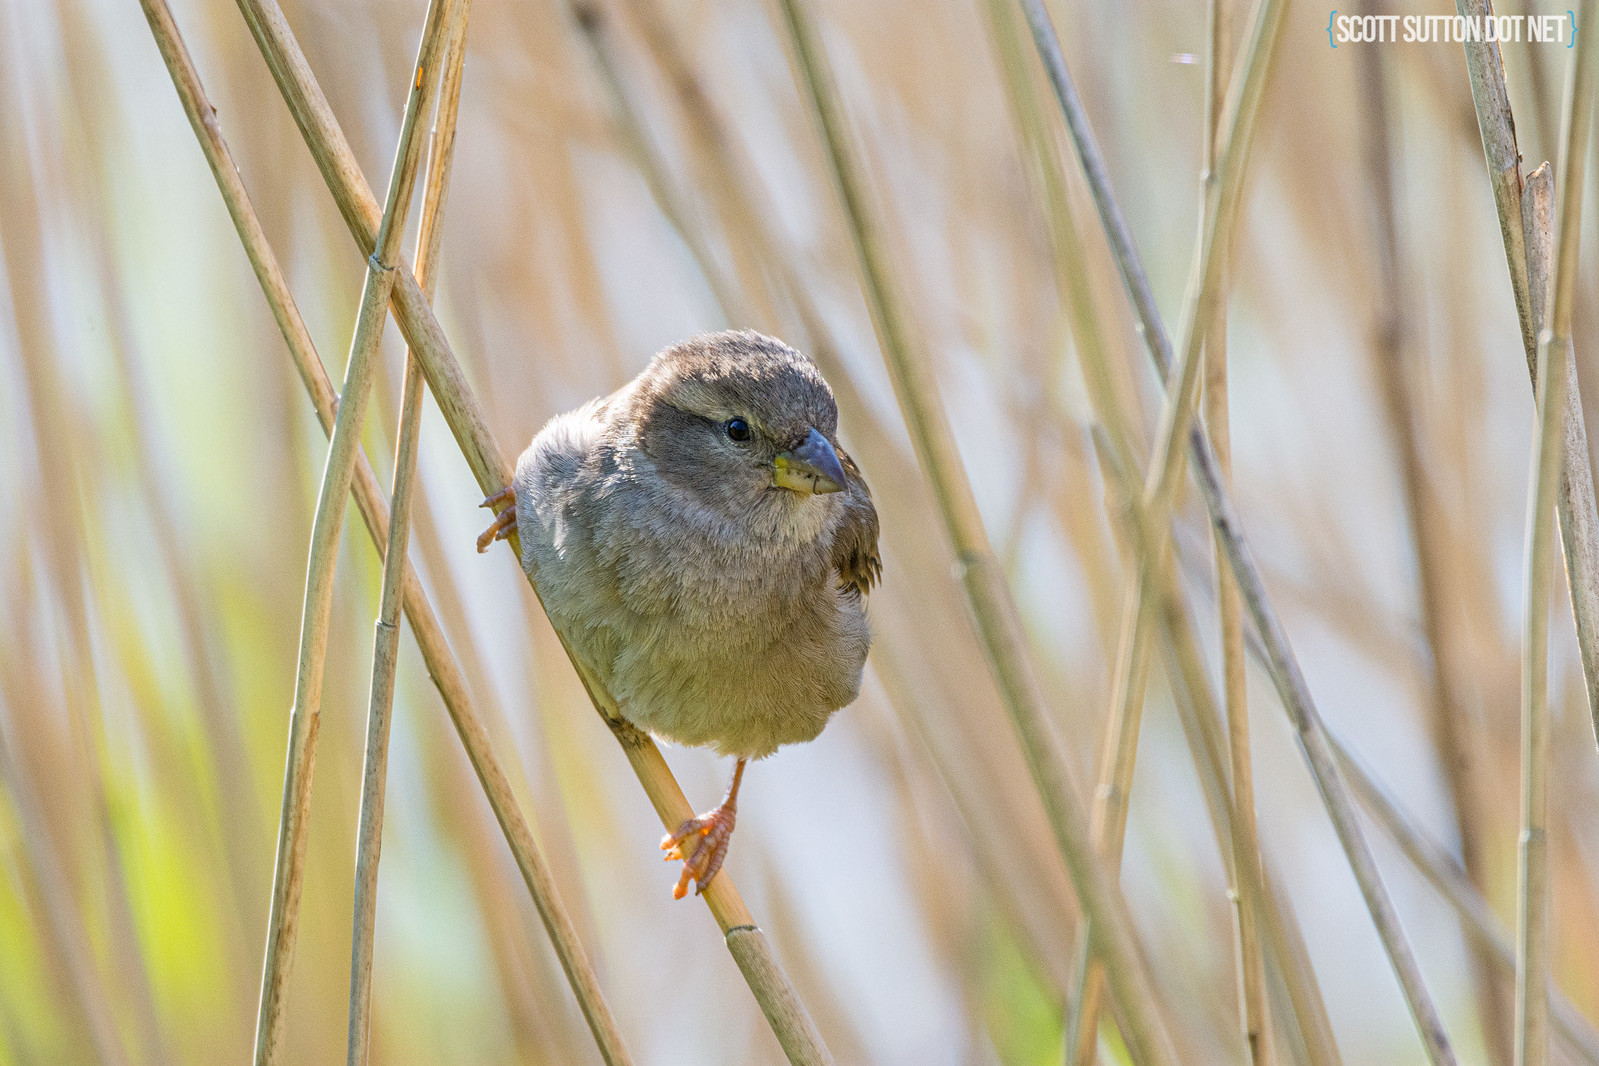 Young sparrow in reeds